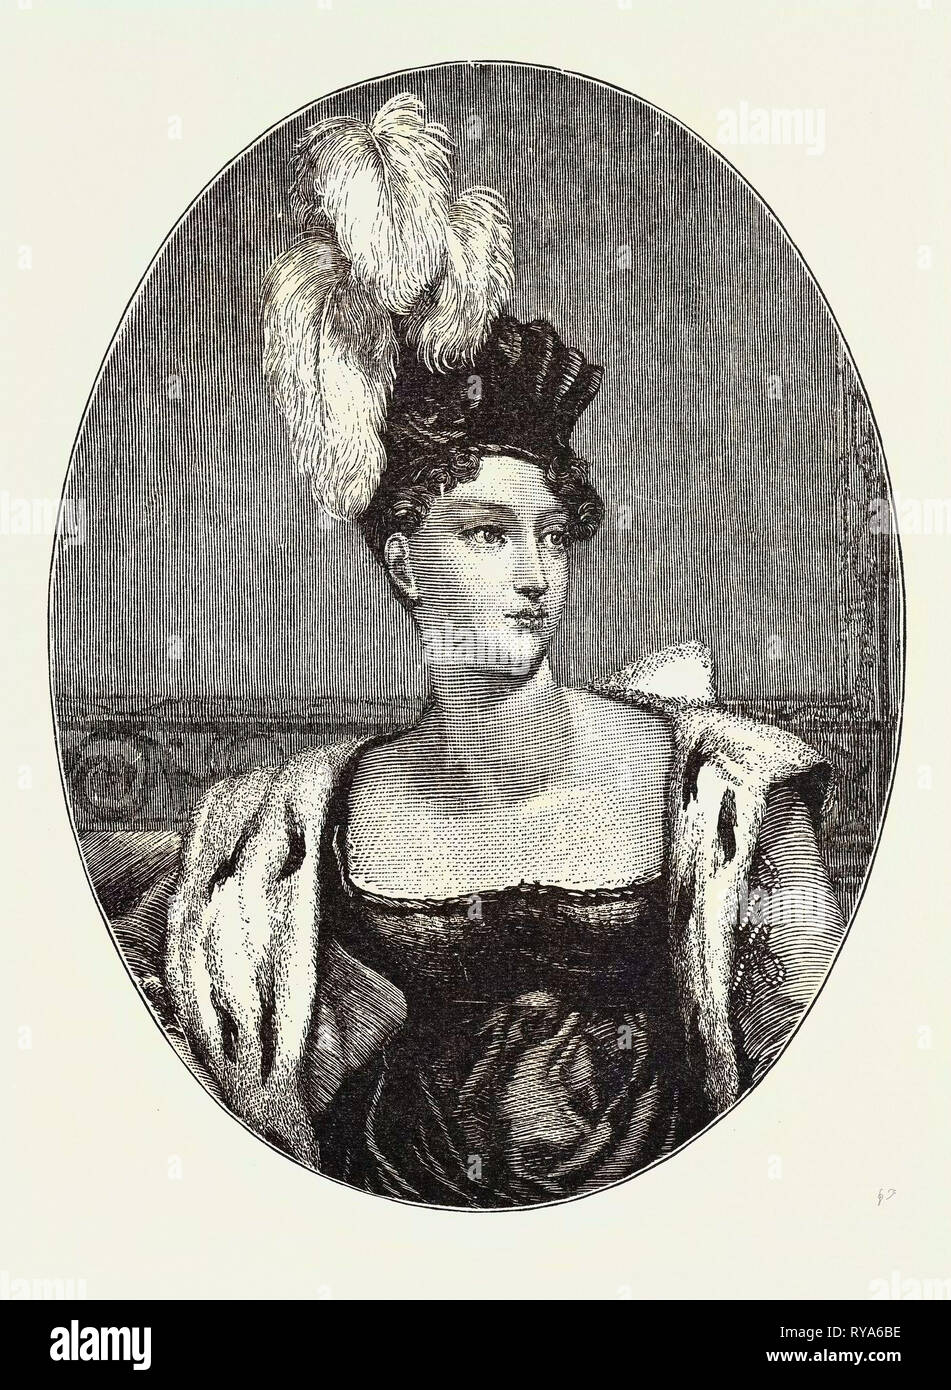 The Princess Charlotte Augusta, 1796 - 1817. Daughter of George, Prince of Wales and Caroline of Brunswick Stock Photo